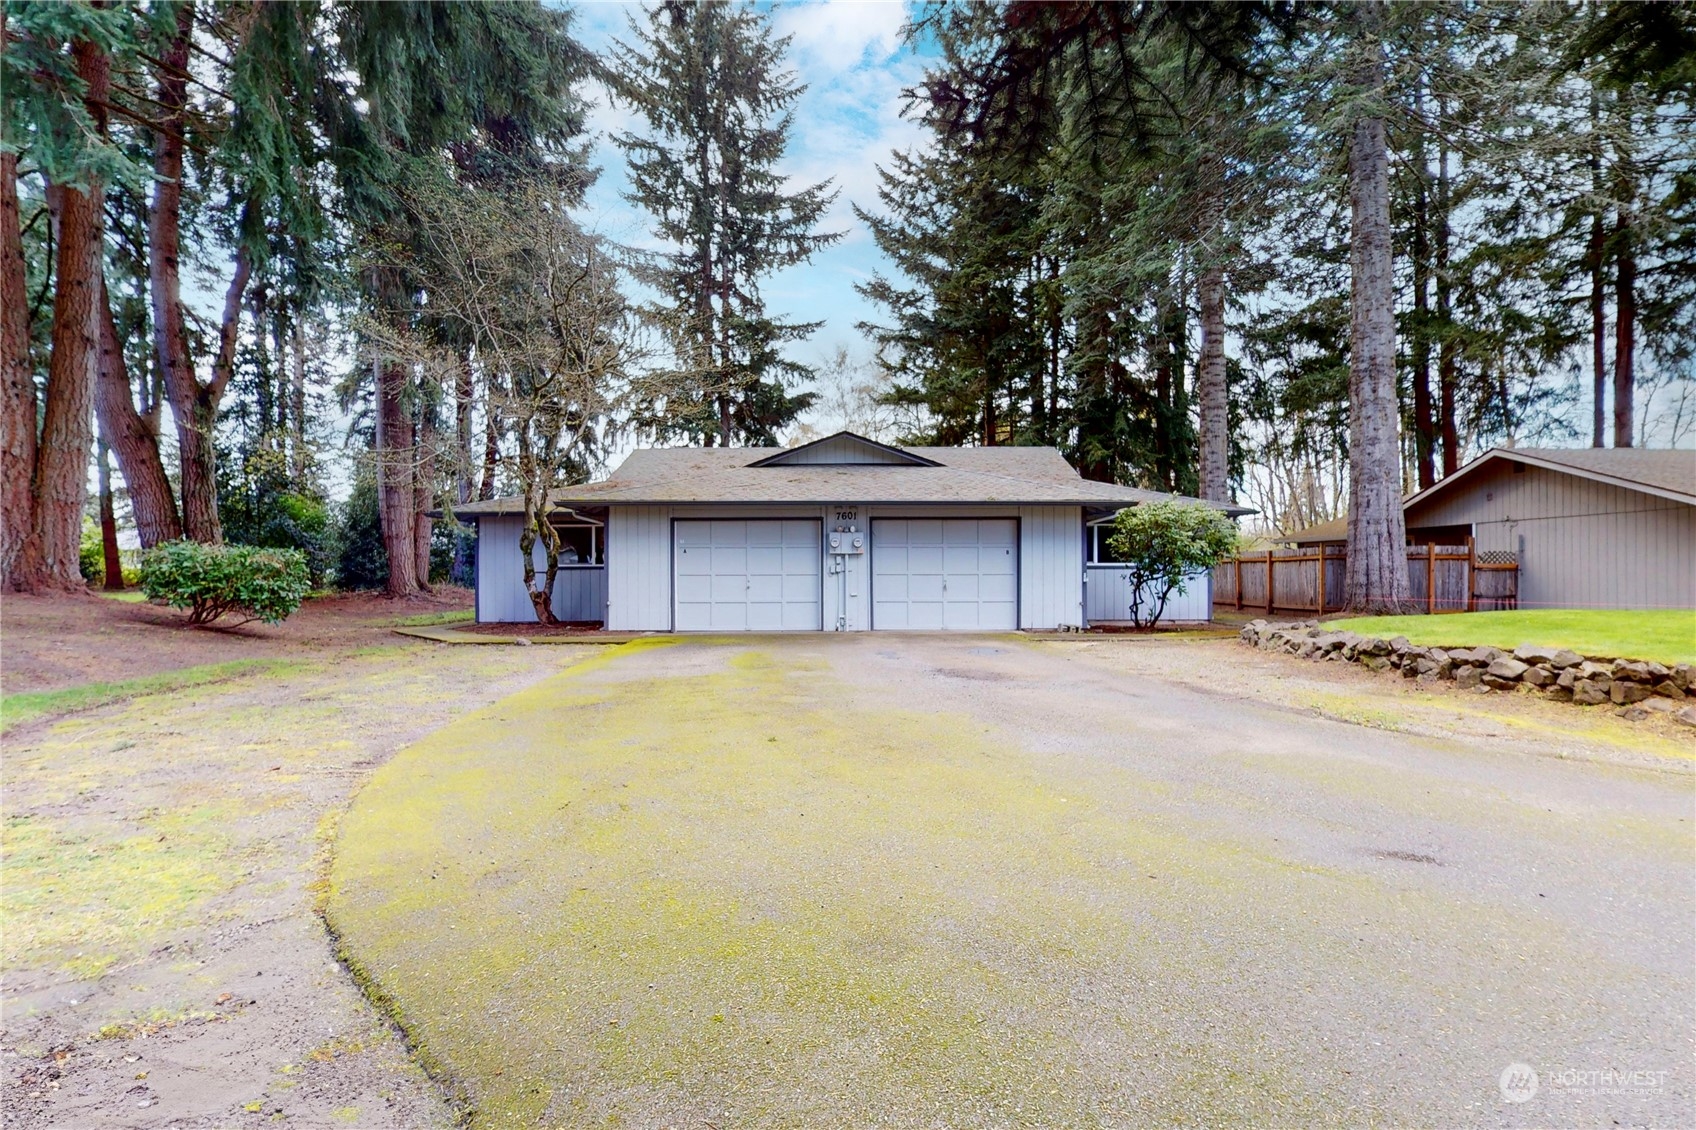 front view of a house with a yard and a large tree